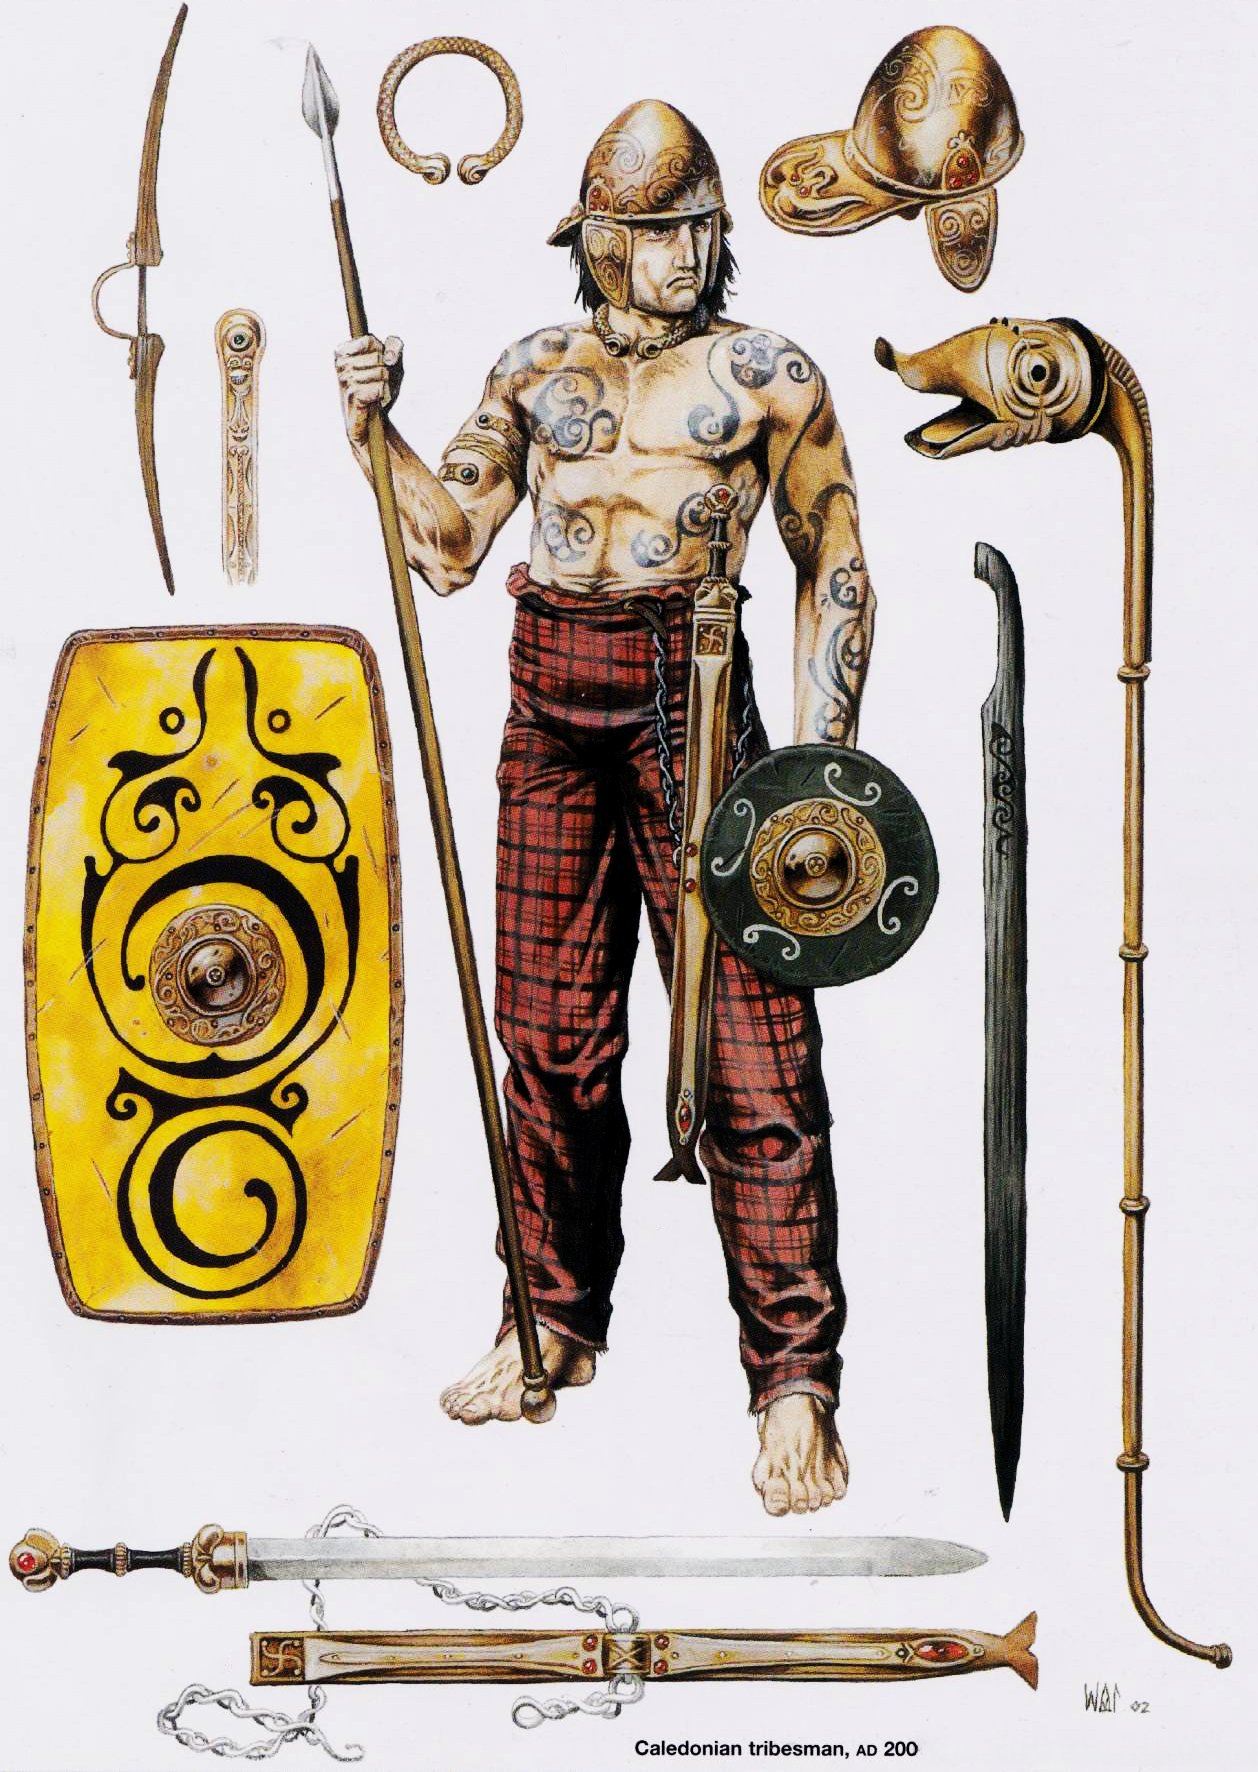 An illustration of a Caledonian tribesman from around 200 AD, armed with a spear, sword, shield, and helmet. The figure wears red and black plaid pants and a gold torc around their neck. The tribesman is surrounded by illustrations of different Pictish weapons such as a large shield, a sword, a knife, a helmet and an ancient carnyx (wind instrument).